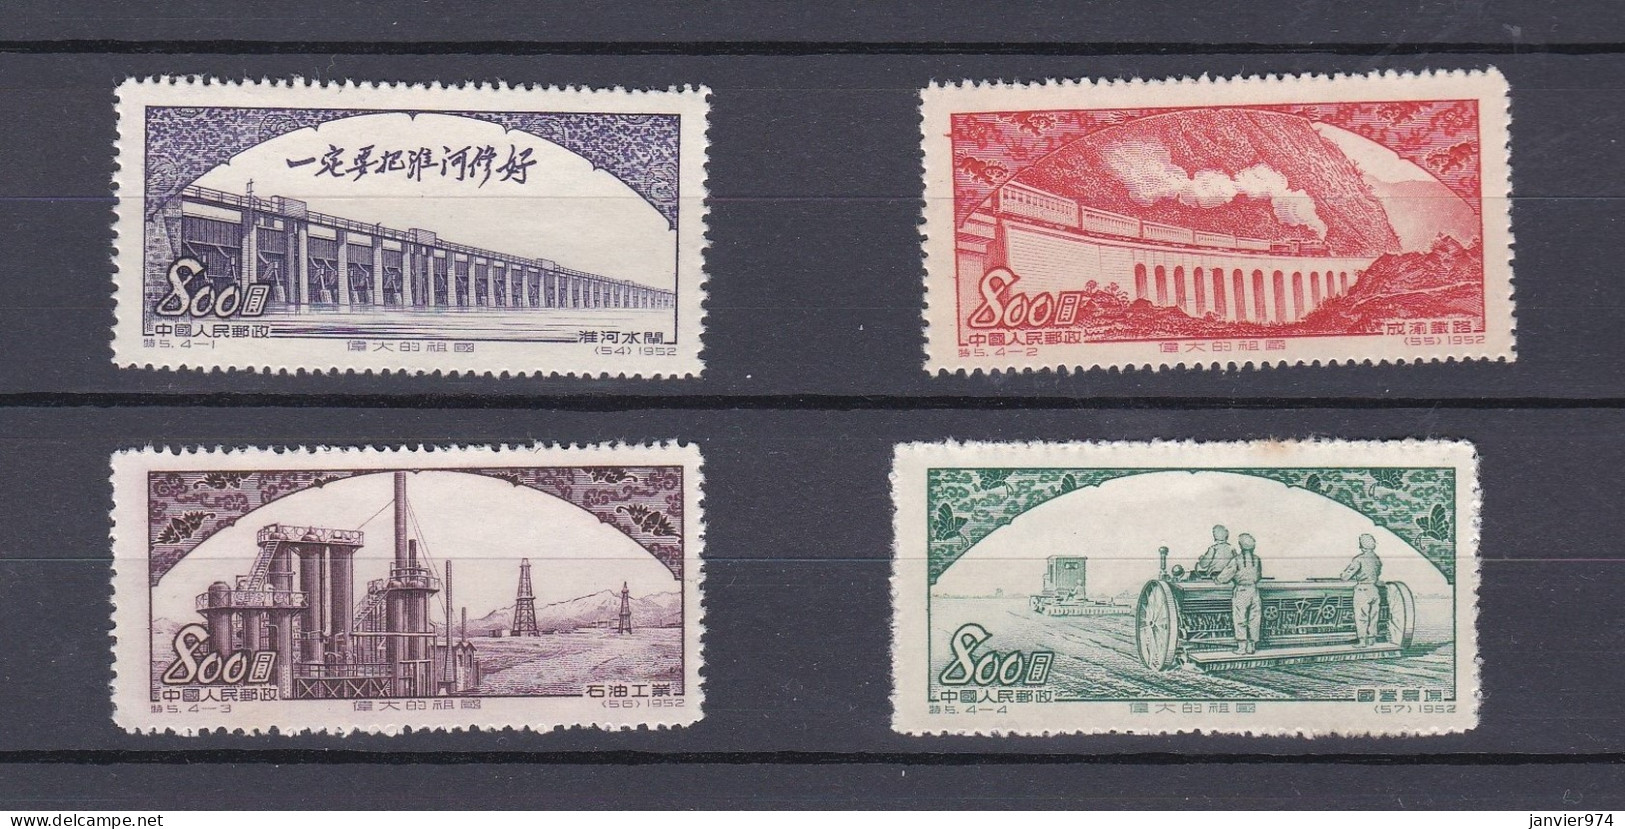 Chine 1952 La Serie Complete , Glorieuse Patrie, 4 Timbres Neufs 188 à 191, Scan Recto Verso - Ongebruikt